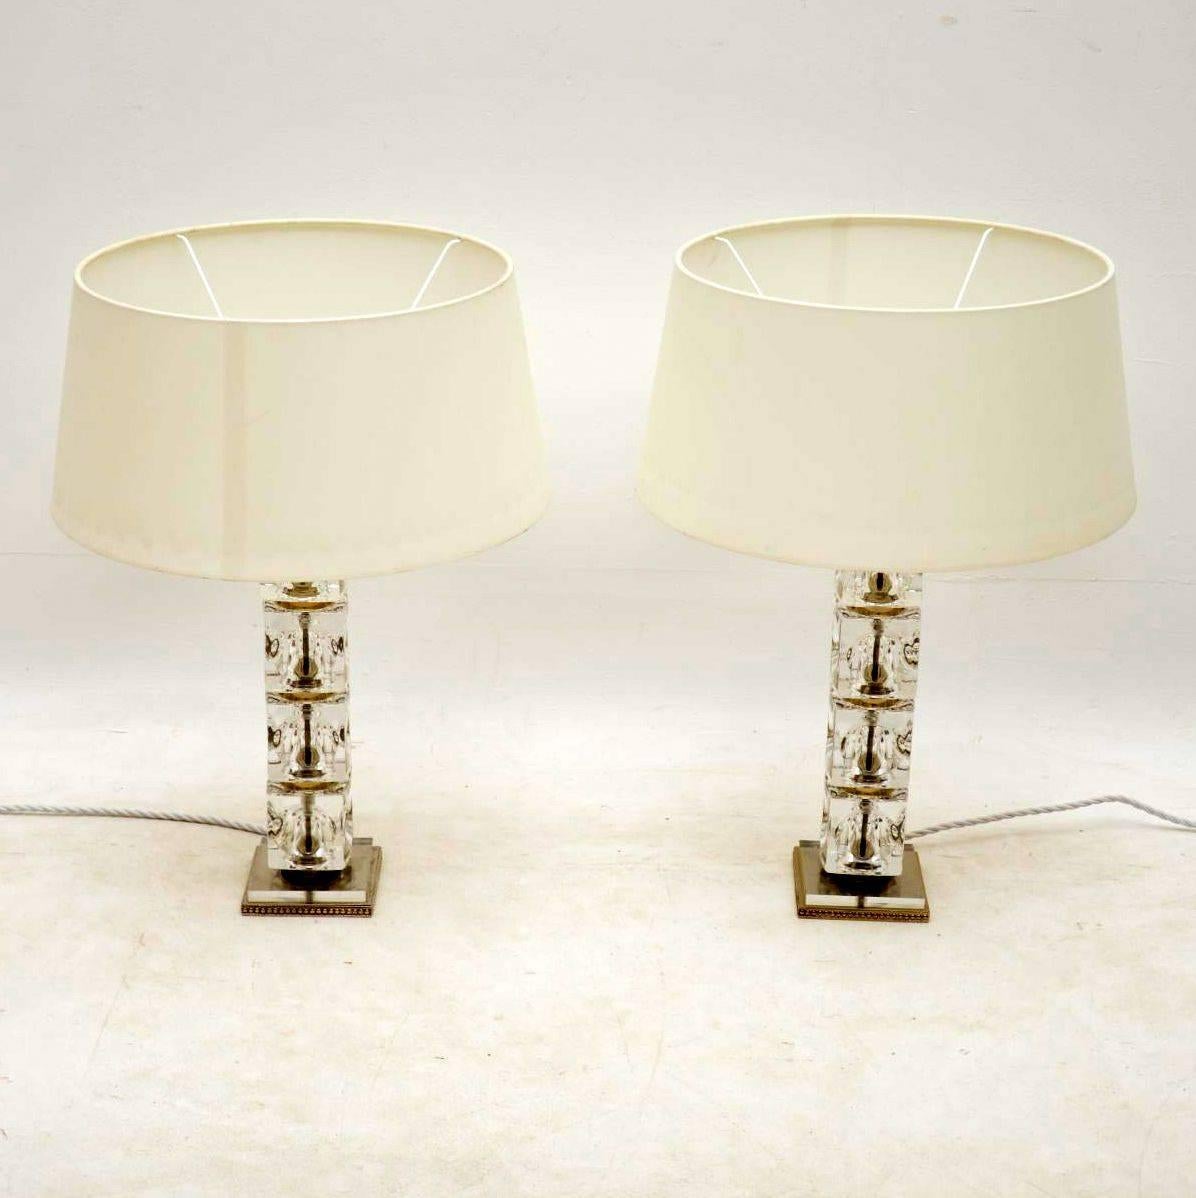 A stunning pair of vintage table lamps constructed from thick glass cubes with steel and brass trim. They are in superb condition for their age with only some extremely minor wear here and there. We have paired these with some lovely white shades